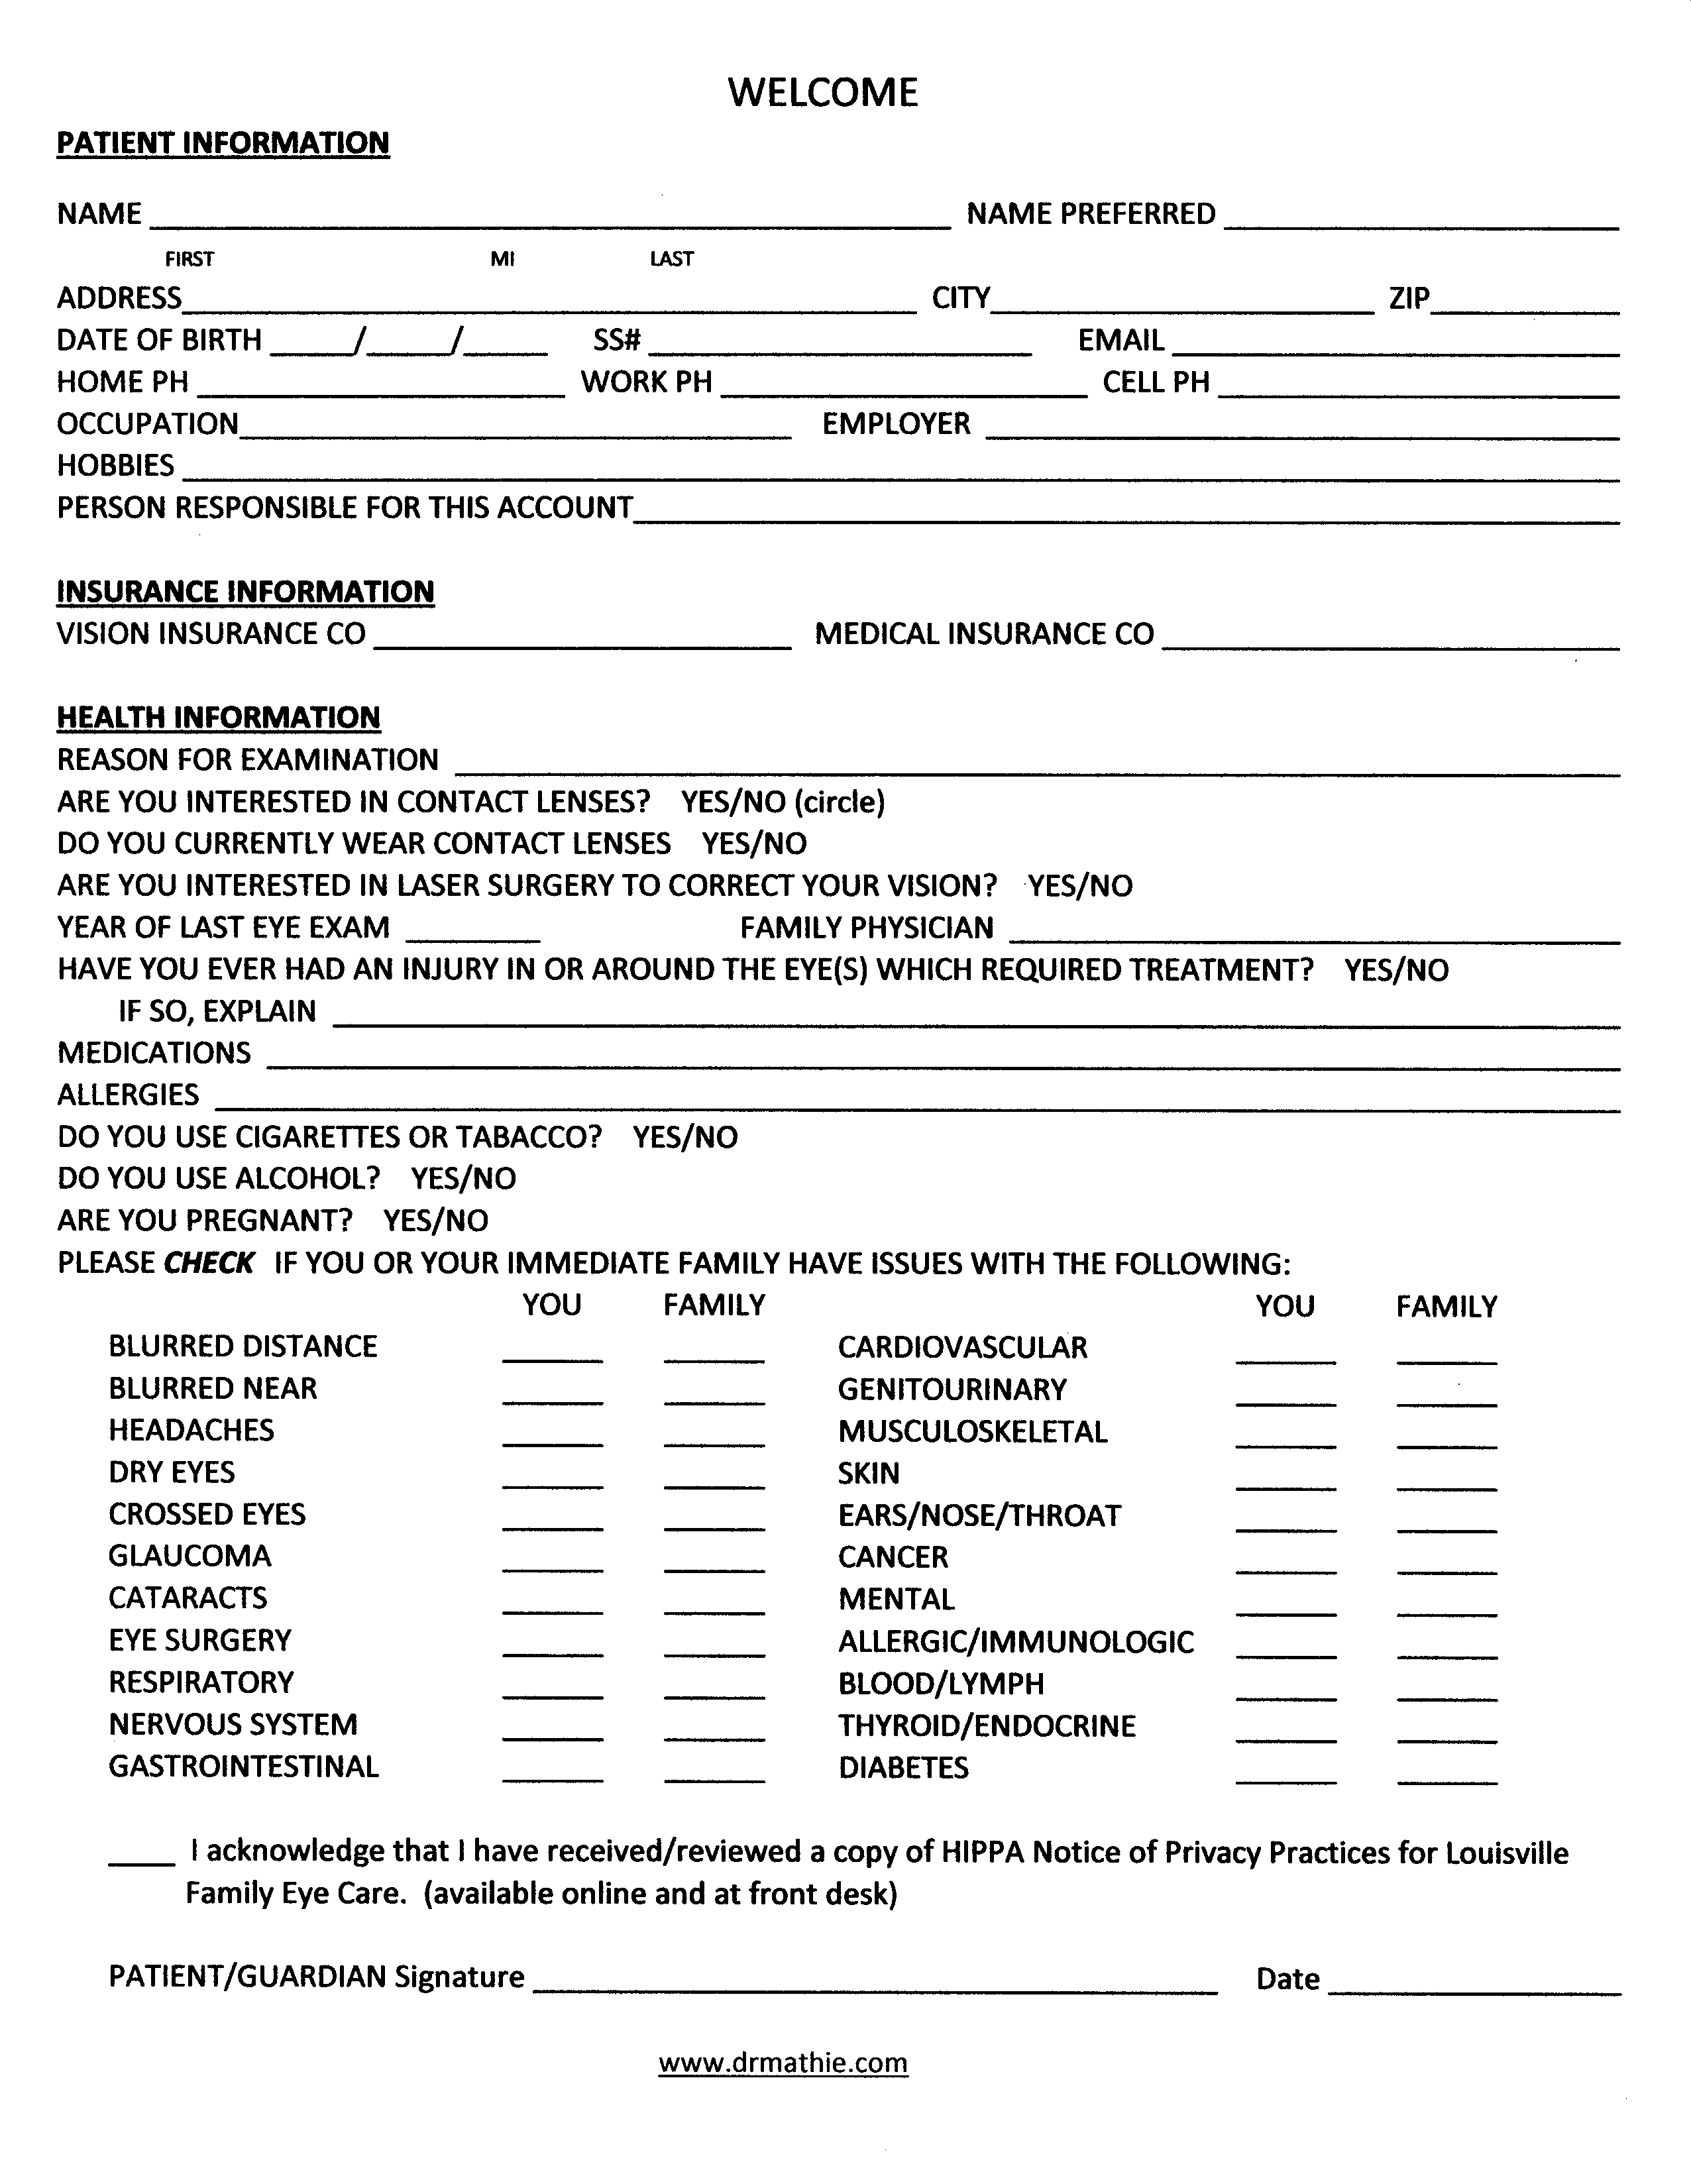 new-patient-form-printable-pdf-download-bank2home